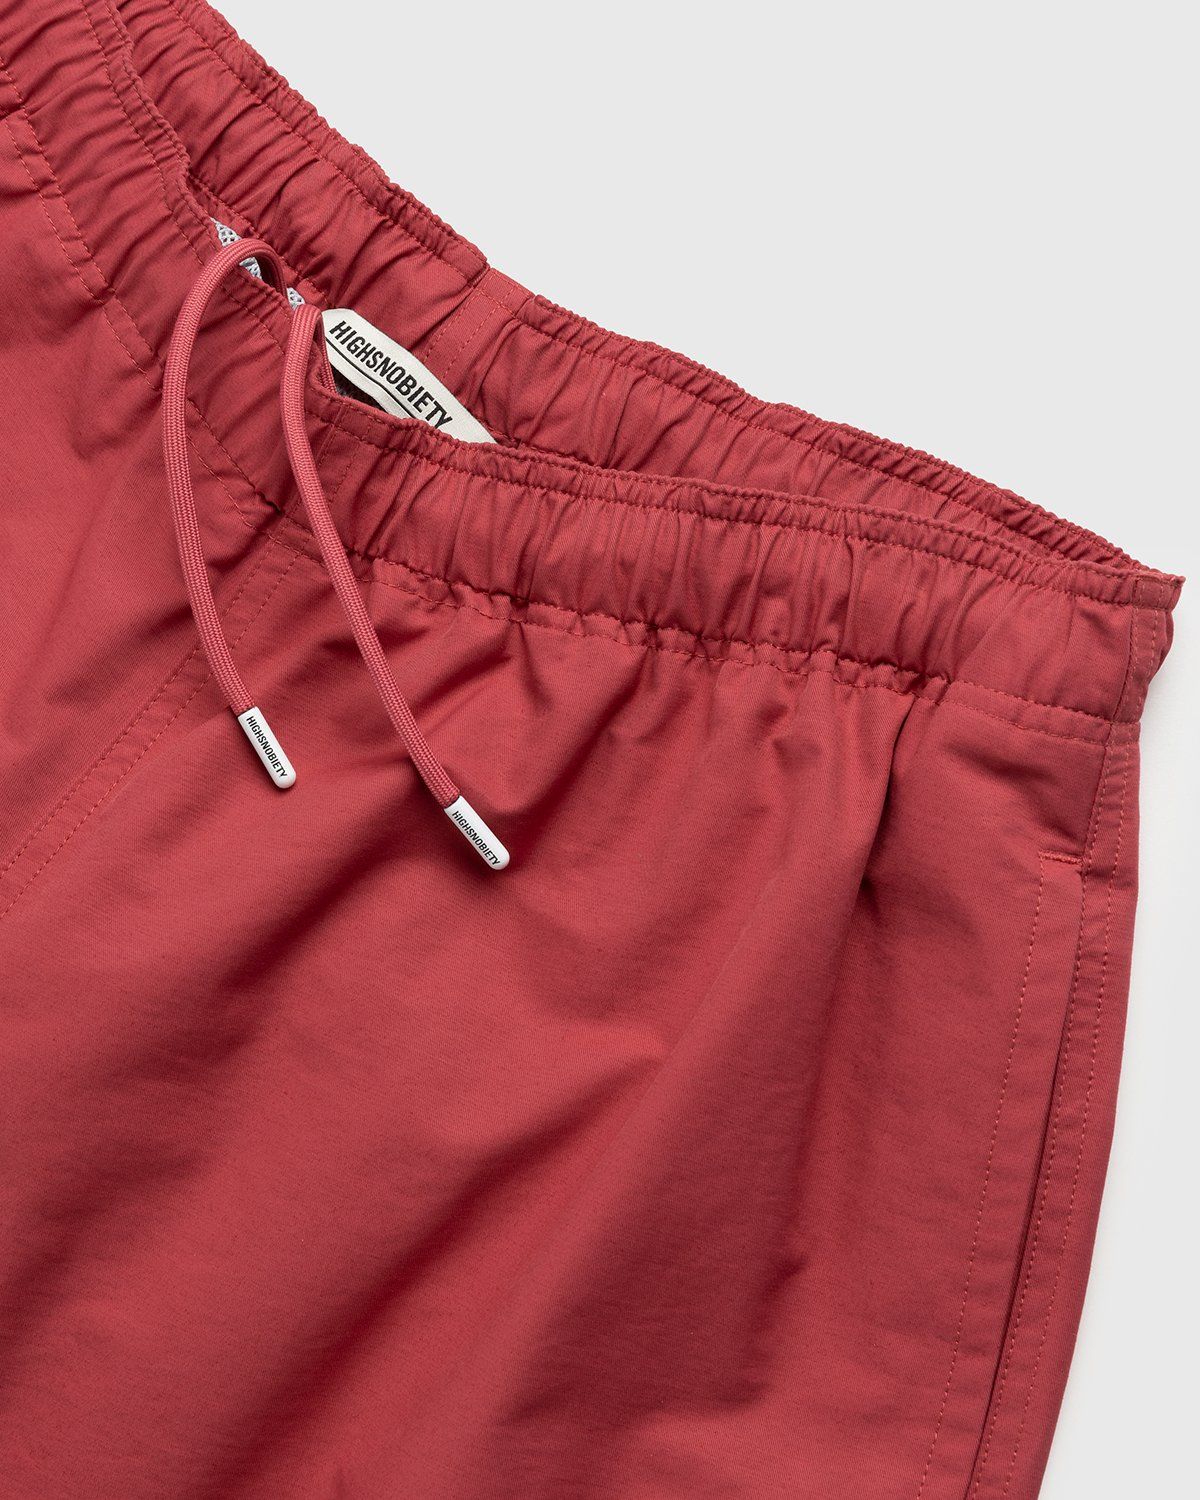 Highsnobiety – Cotton Nylon Water Short Red - Active Shorts - Pink - Image 3